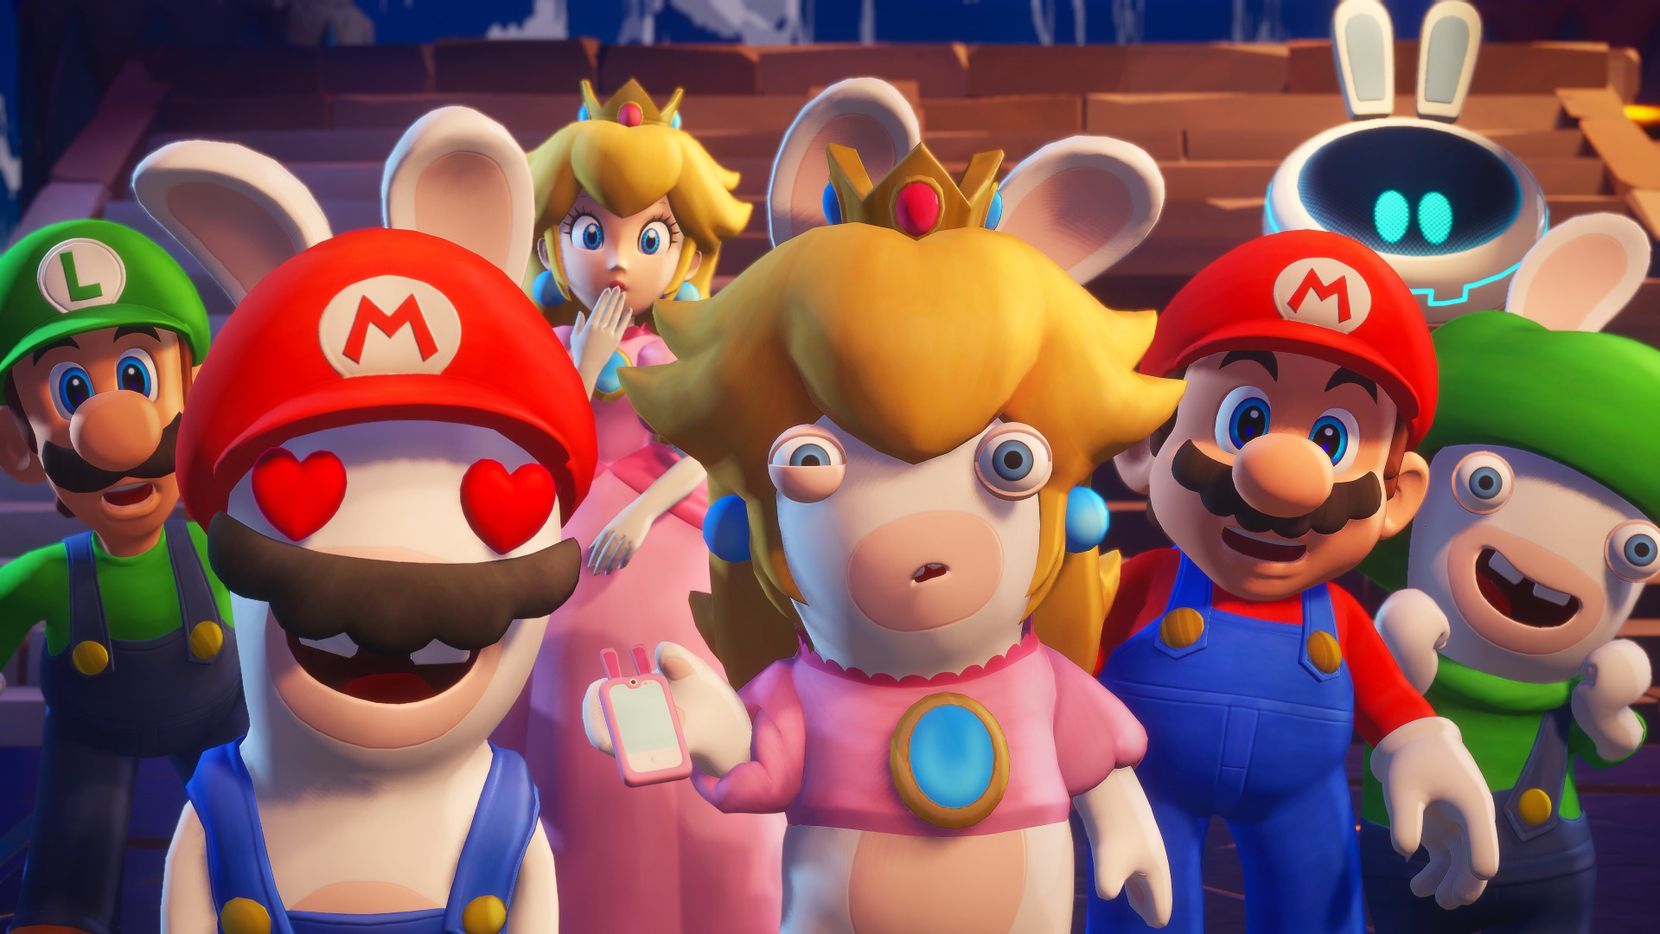 An image from the video game "Mario + Rabbids: Sparks of Hope" on the Nintendo Switch.